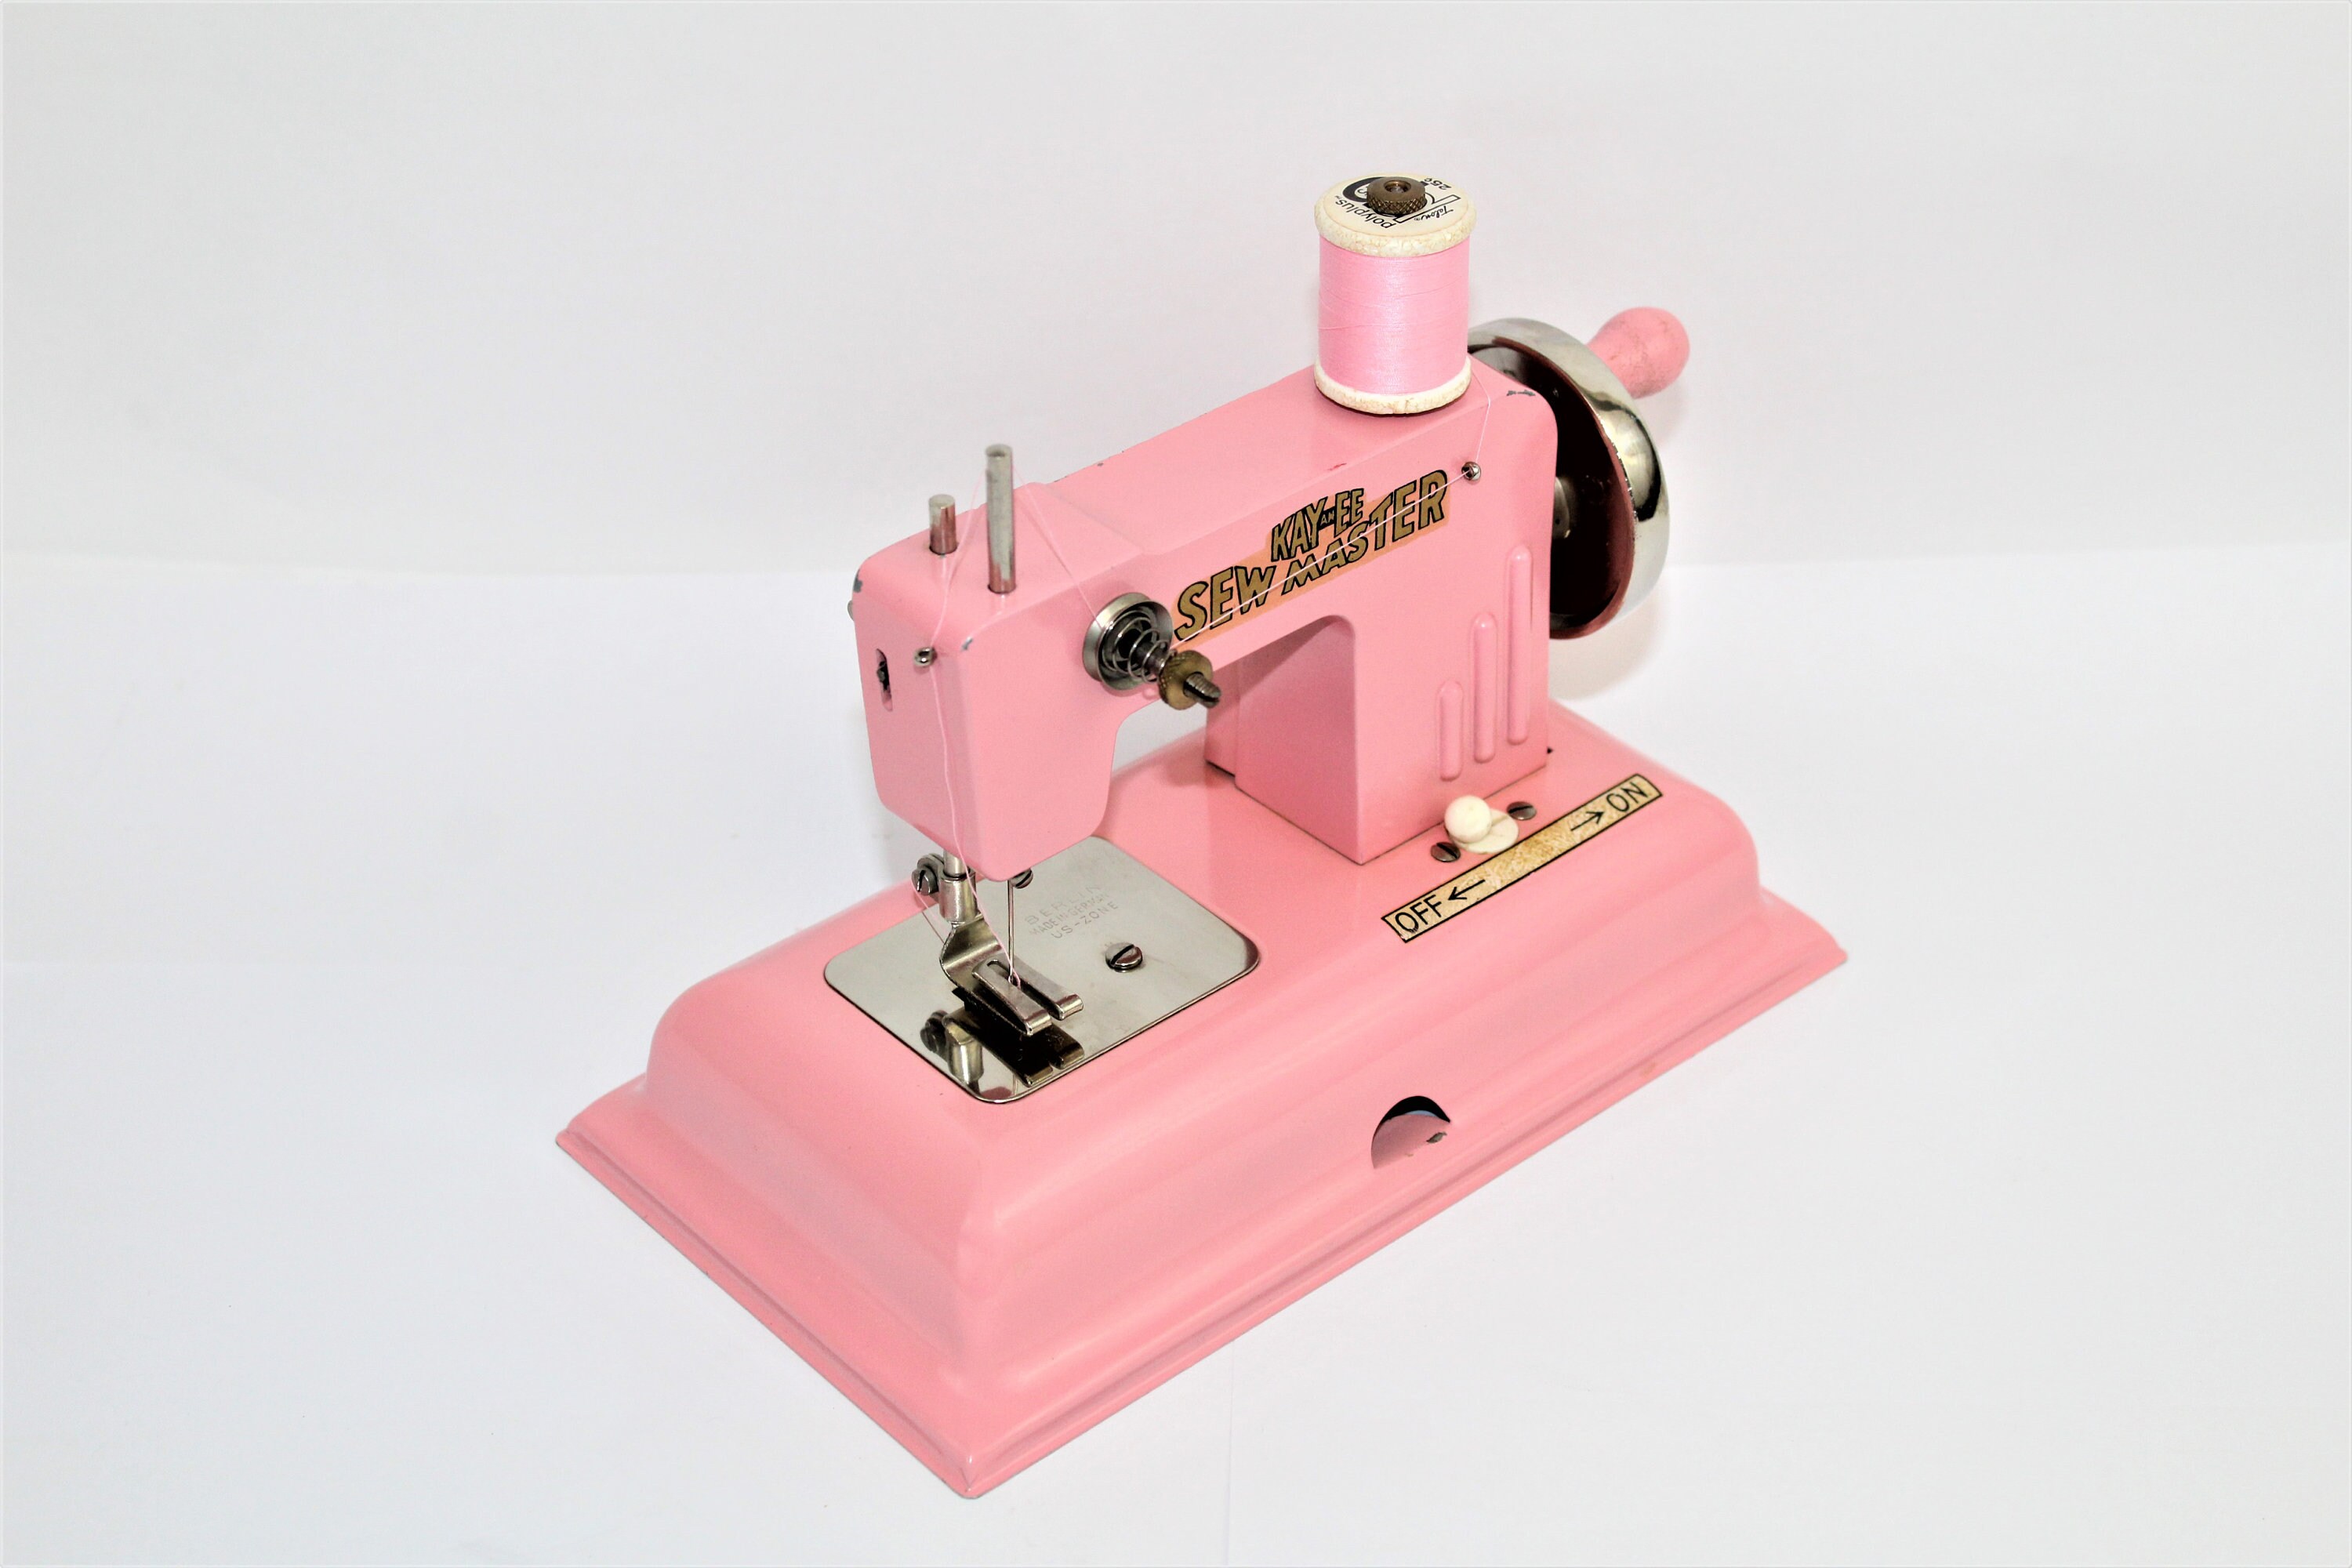 Pink KAY an EE Sew Master Child's Sewing Machine